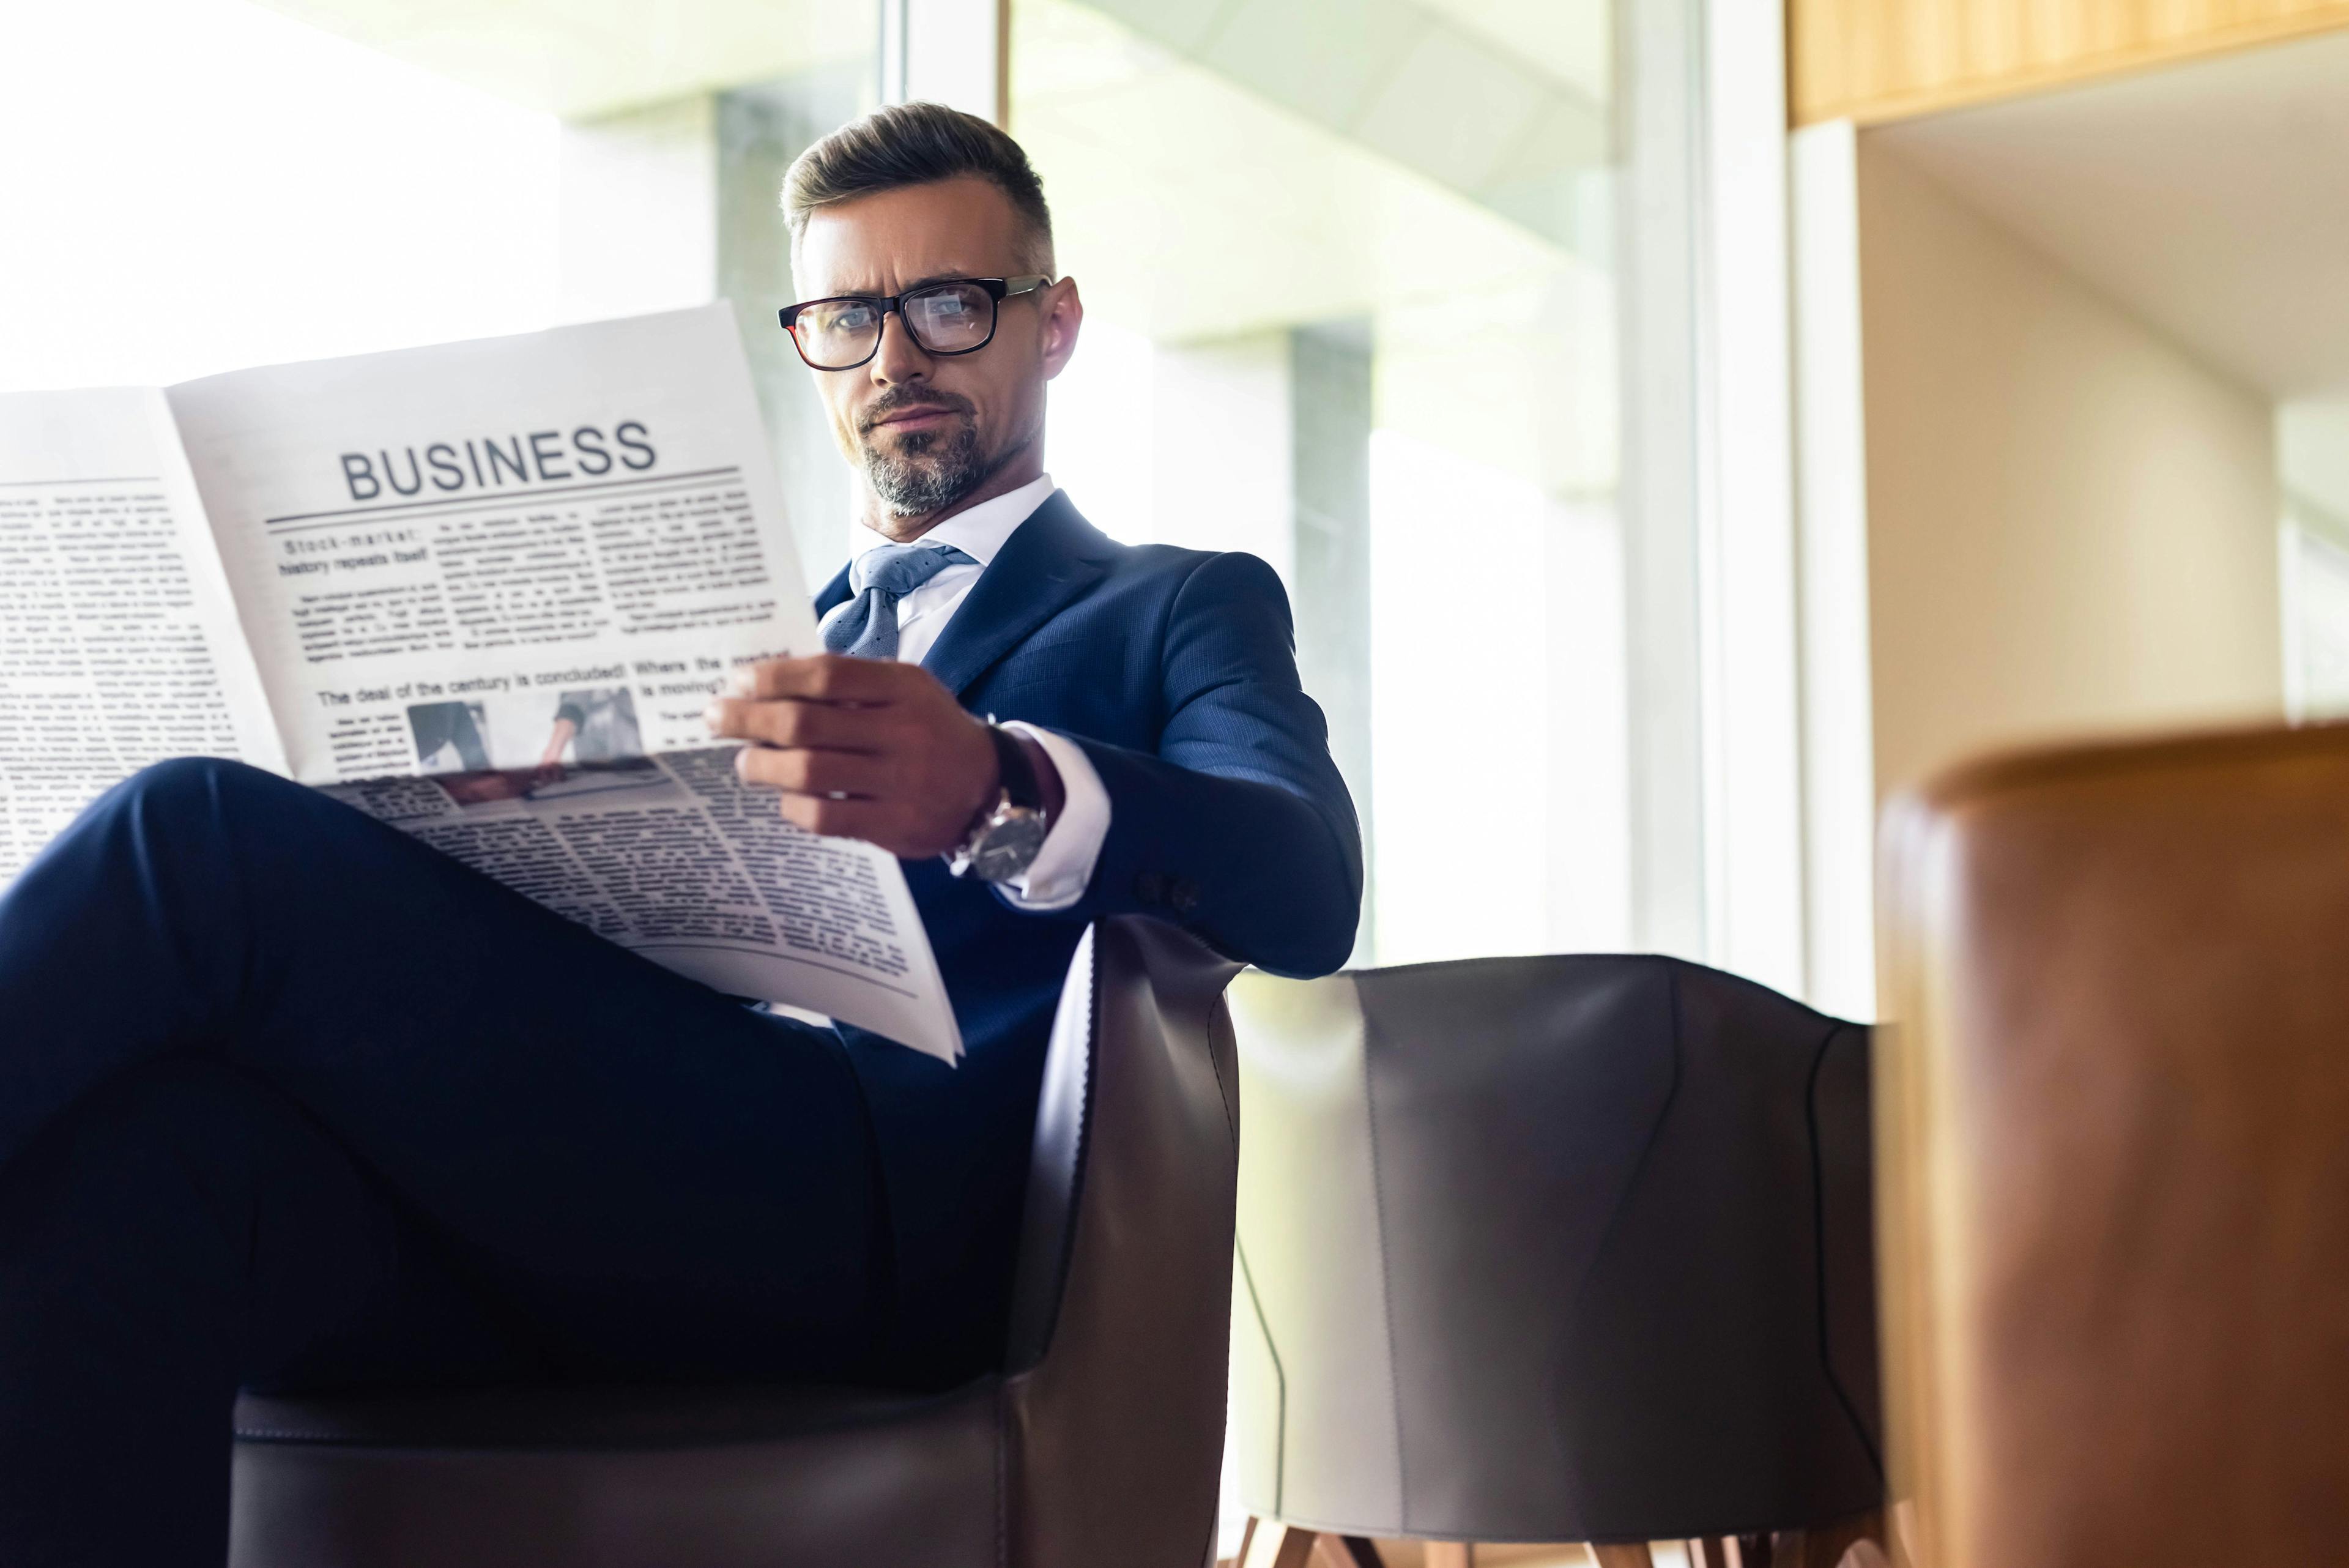 handsome businessman in suit and glasses reading newspaper business | Image Credit: © Lightfield Studios - stock.adobe.com.